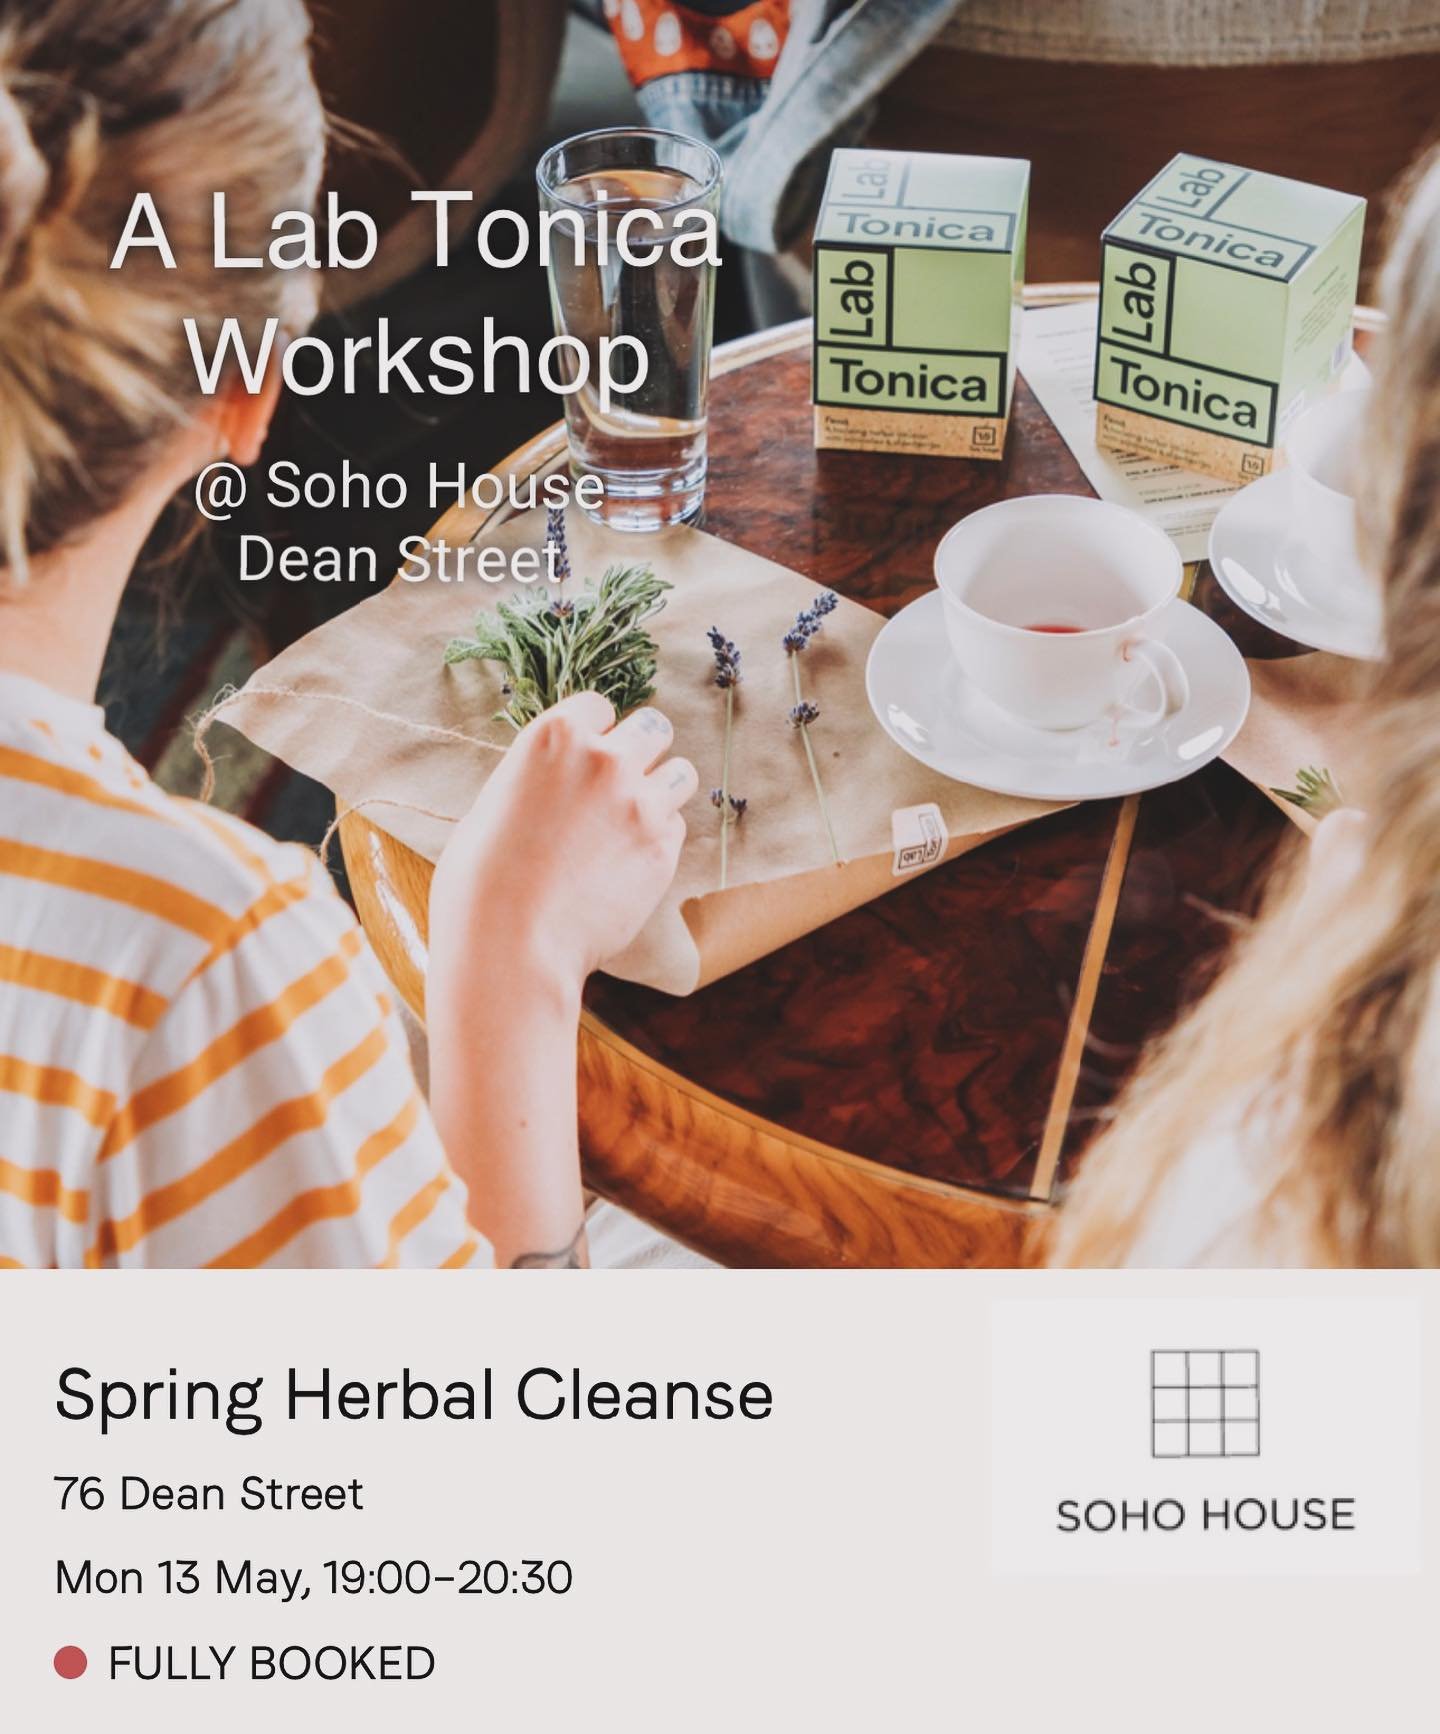 ✨🎟️ WIN A TICKET ⭐️✨ to our Spring Cleanse workshop next Monday 13th 7pm @sohohouse Dean Street.

This will be an intimate, fun and interactive workshop exploring rituals for cleansing the body and mind in preparation for the summer months.  You wil